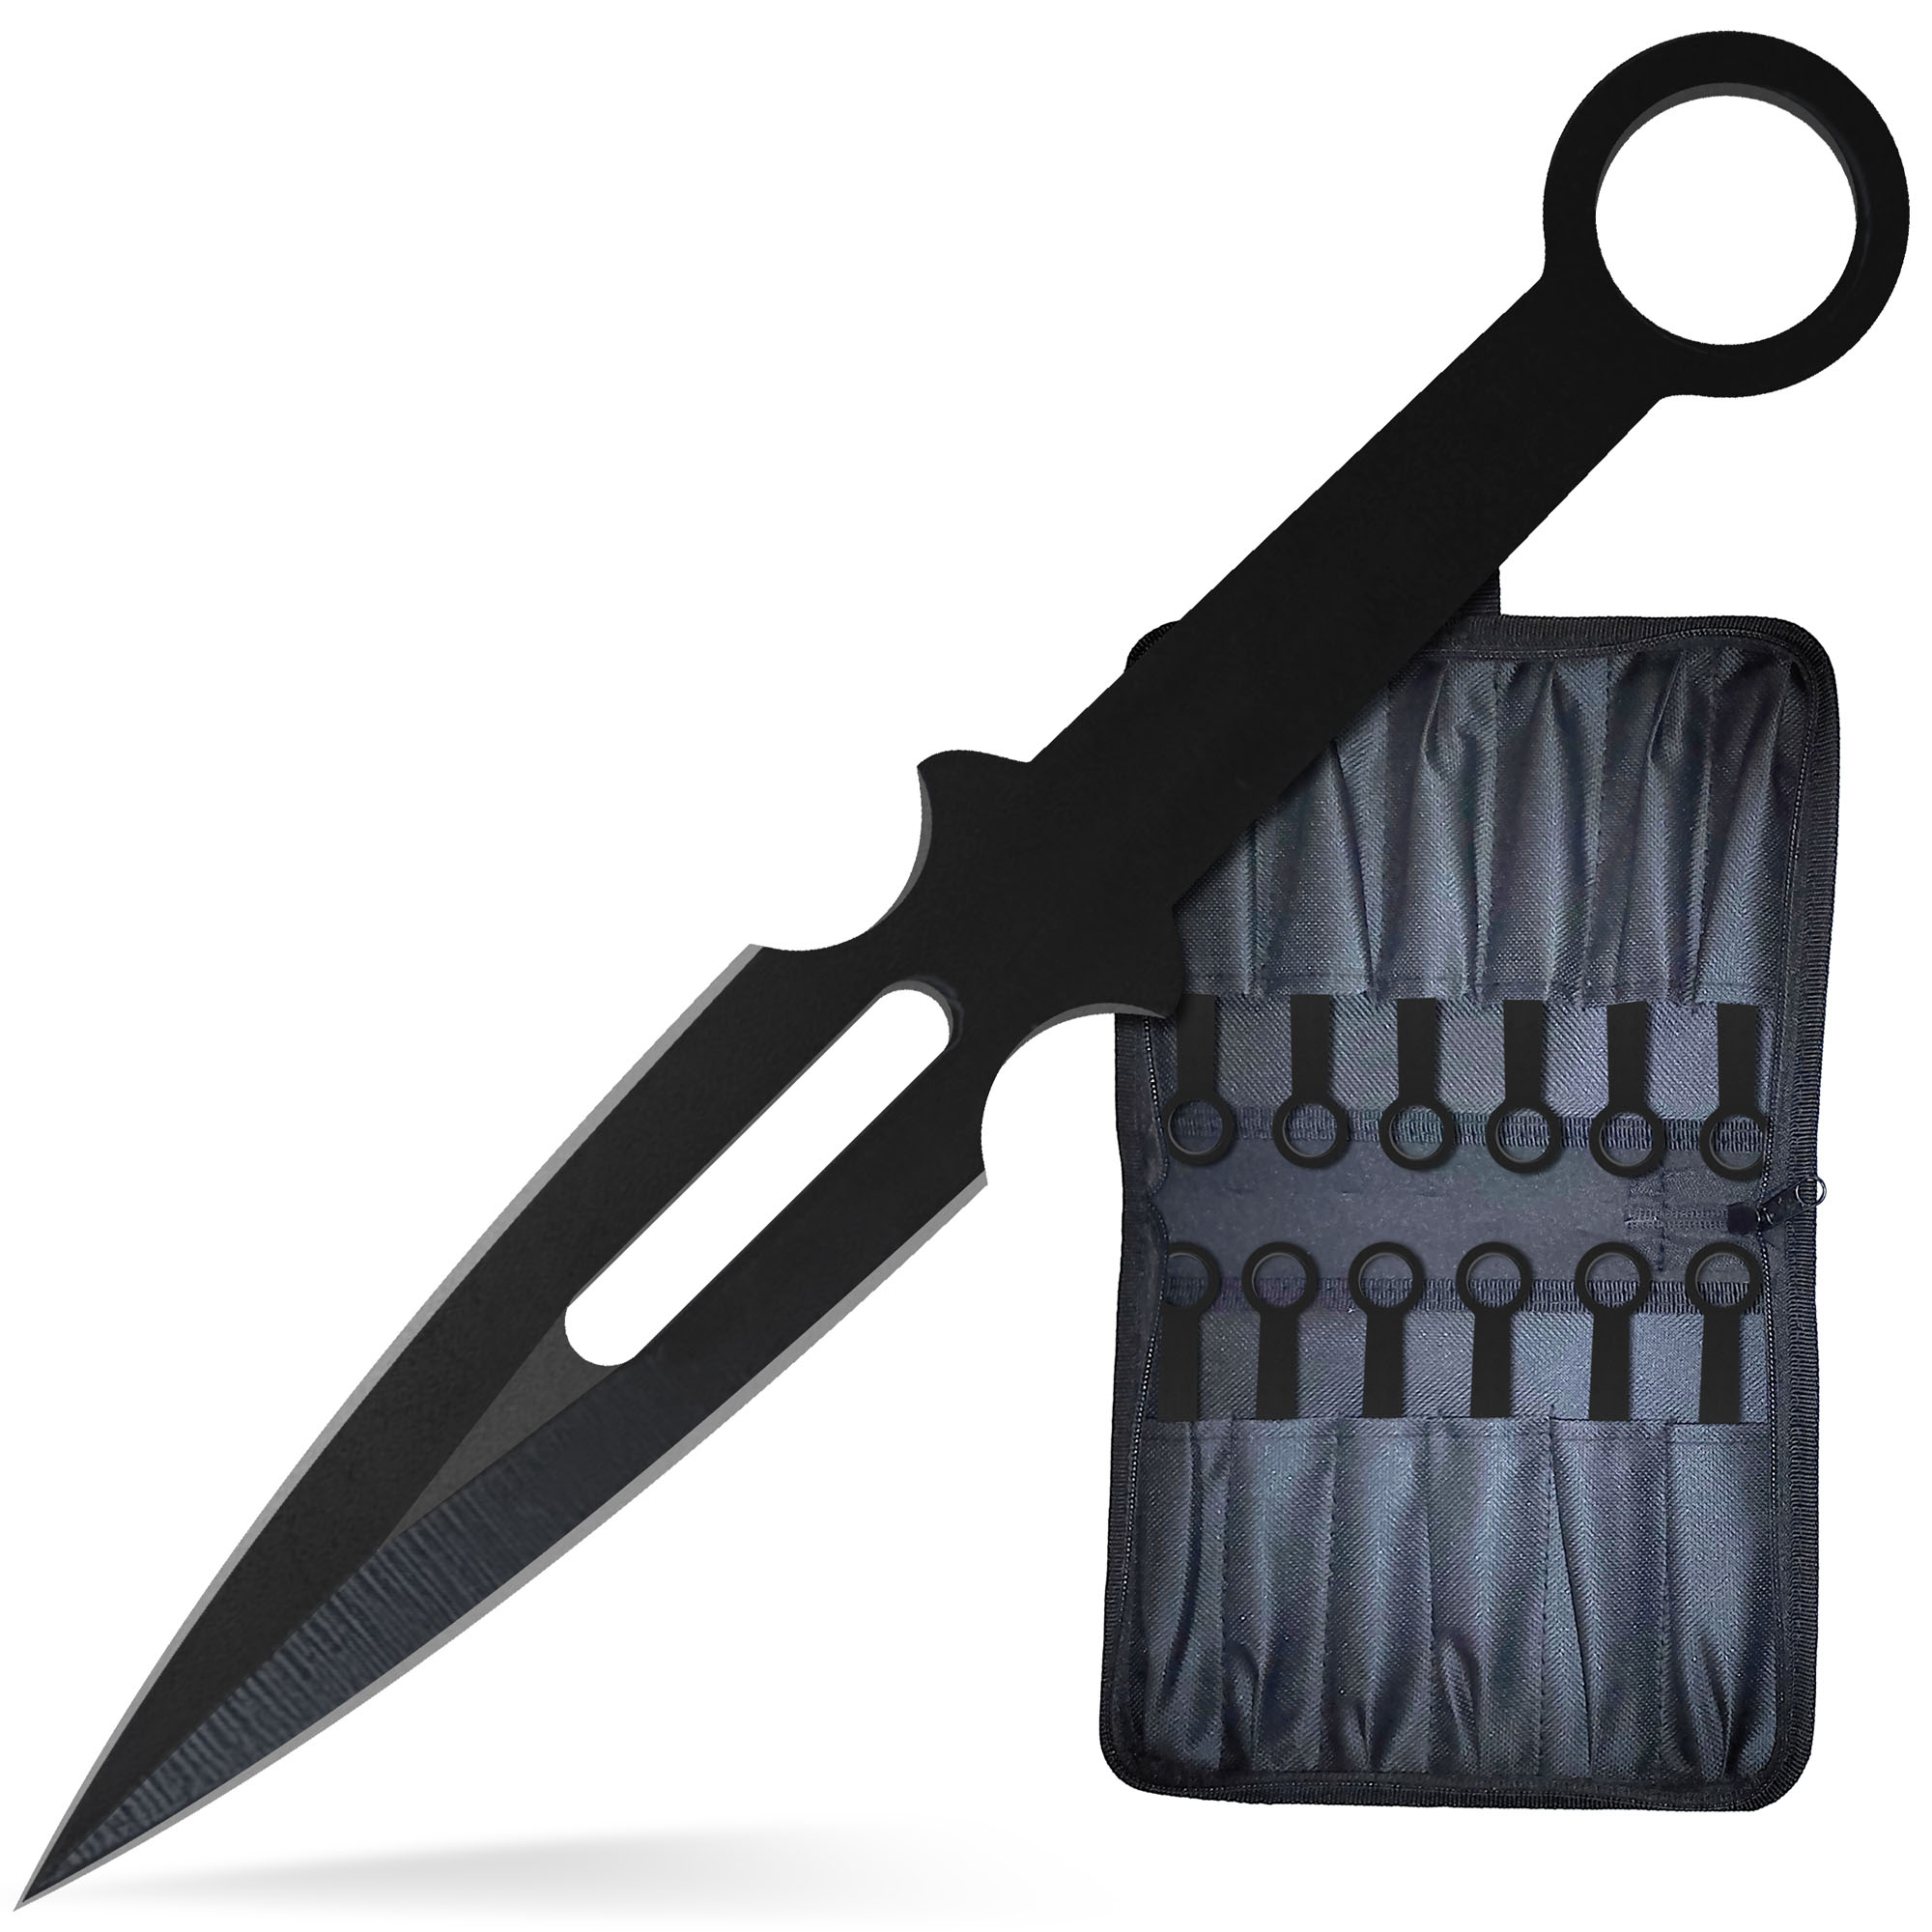 12 Black Throwing Knives with Sheath, Stainless Steel Kunai